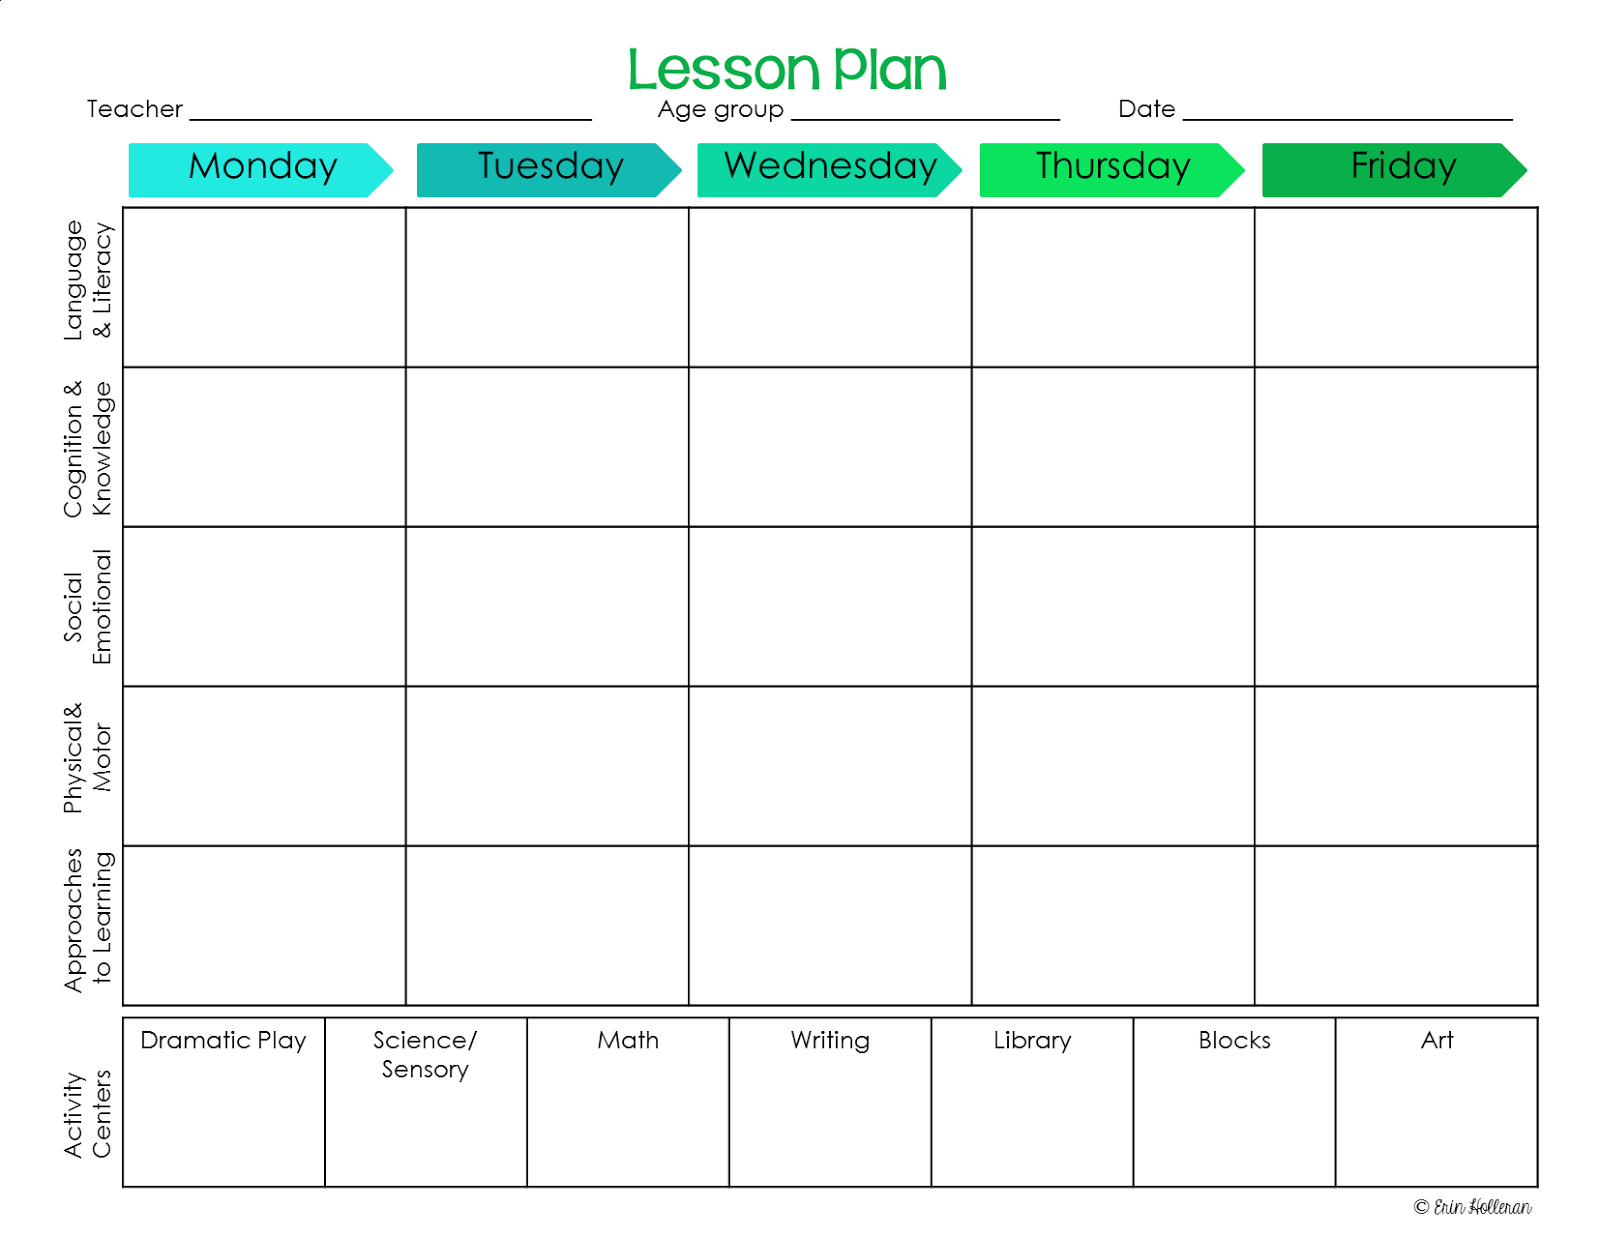 Preschool Ponderings: Make your lesson plans work for you